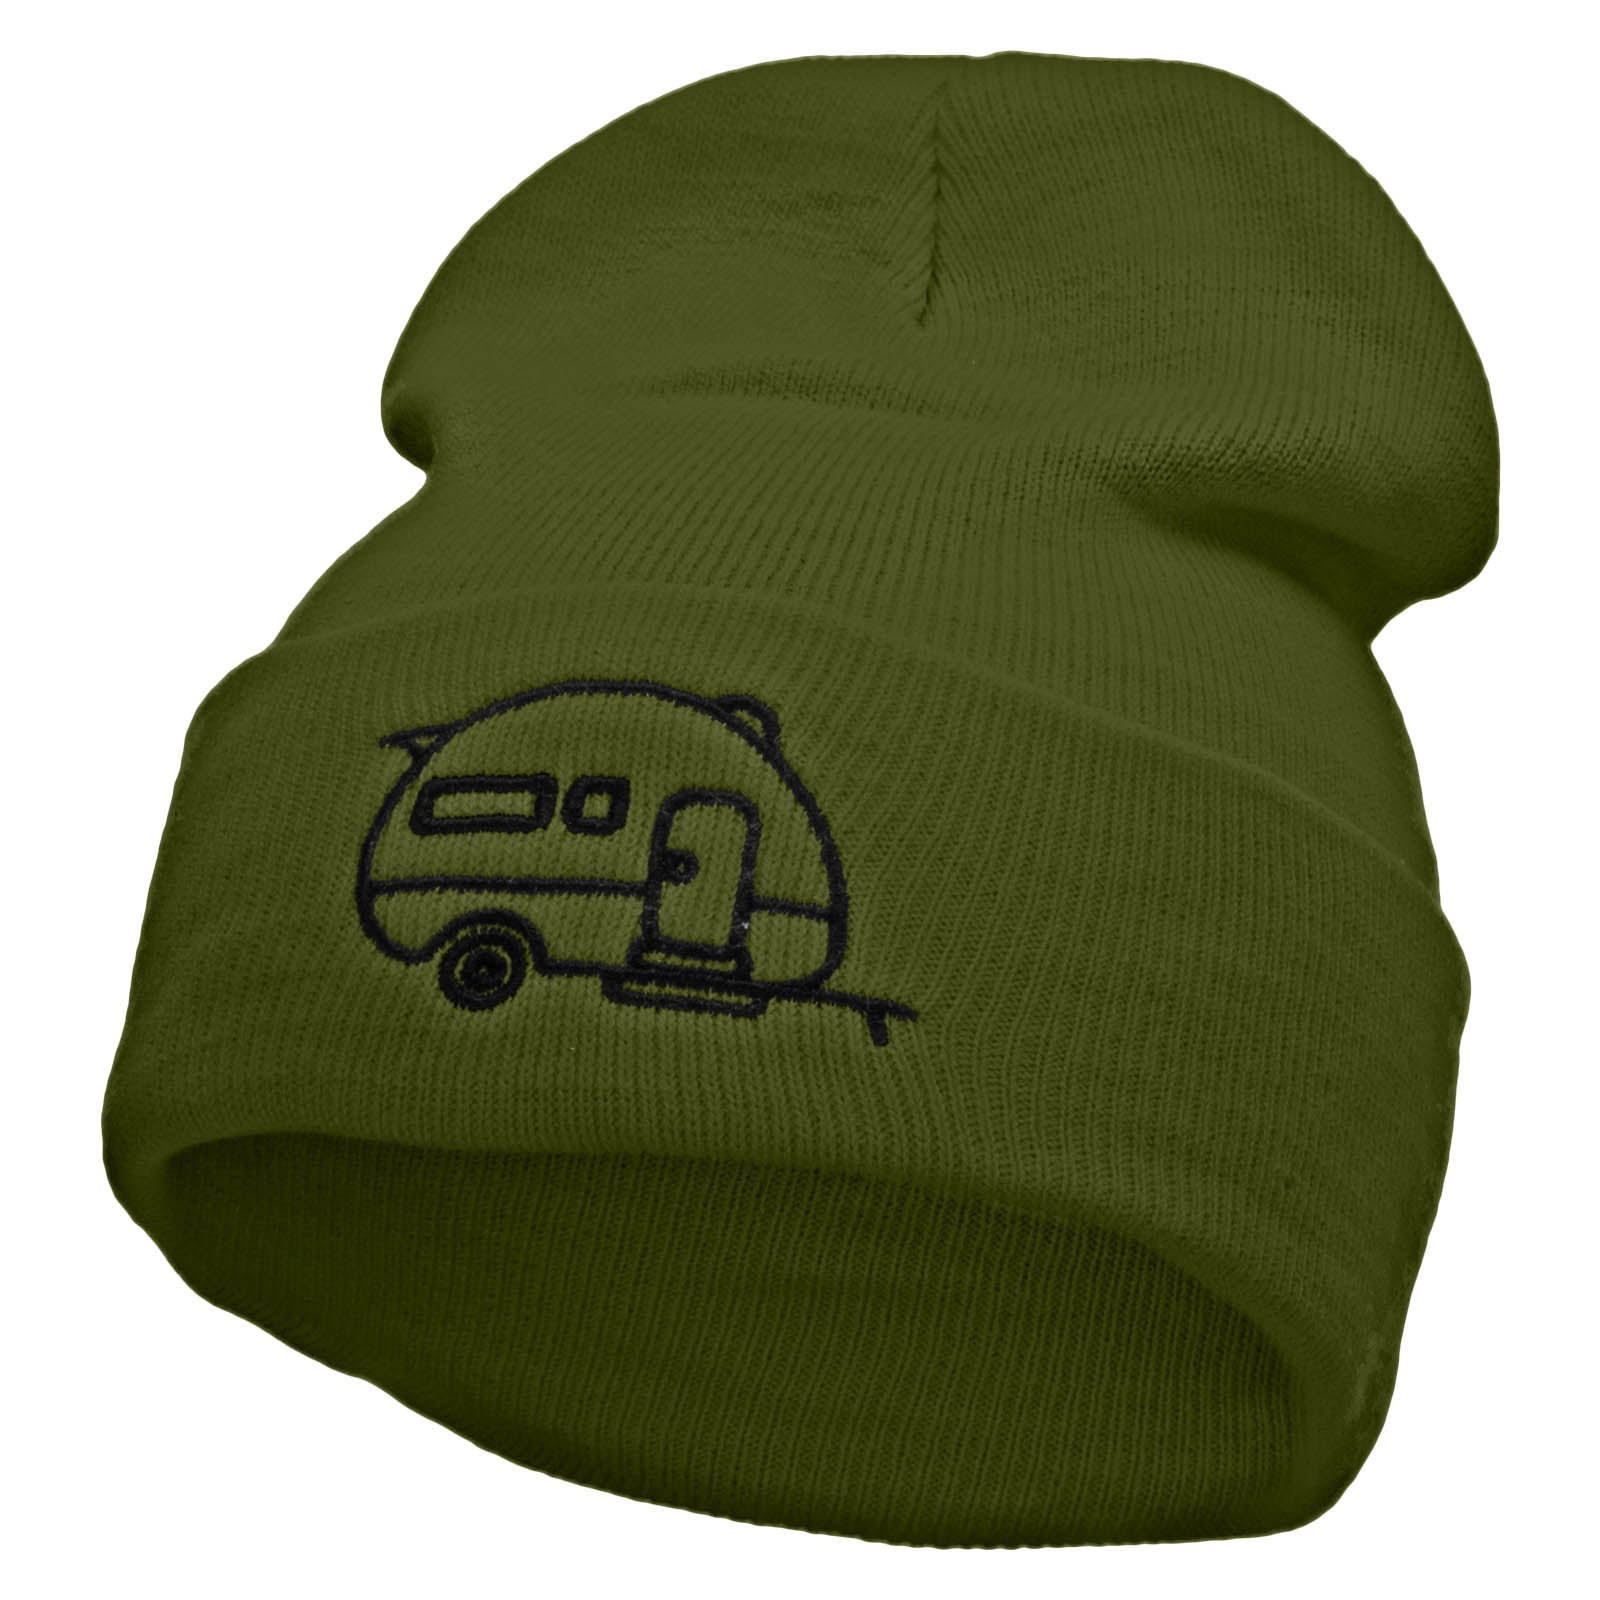 RV Camper Trailer Embroidered 12 inch Acrylic Cuffed Long Beanie - Olive OSFM